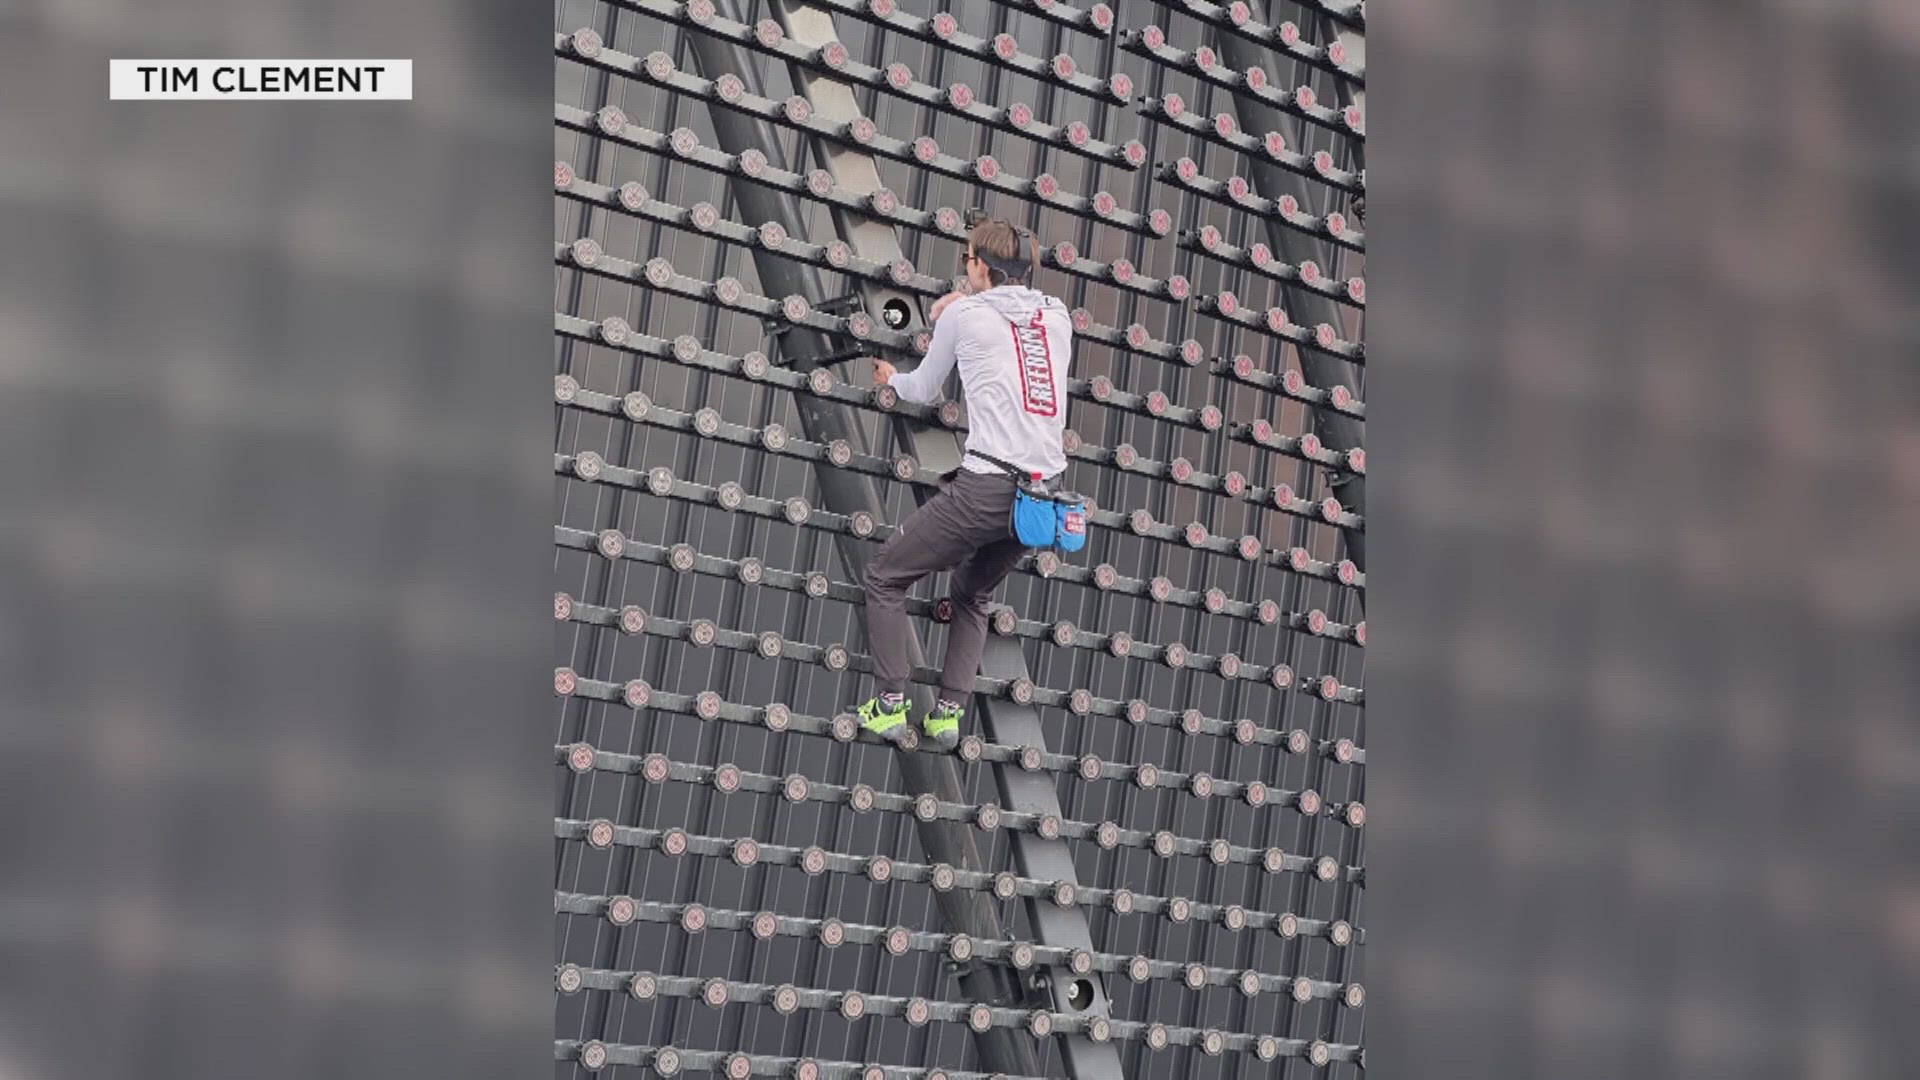 The climber was identified as Maison Deschamps, who reached the top of the 367-foot-tall venue.